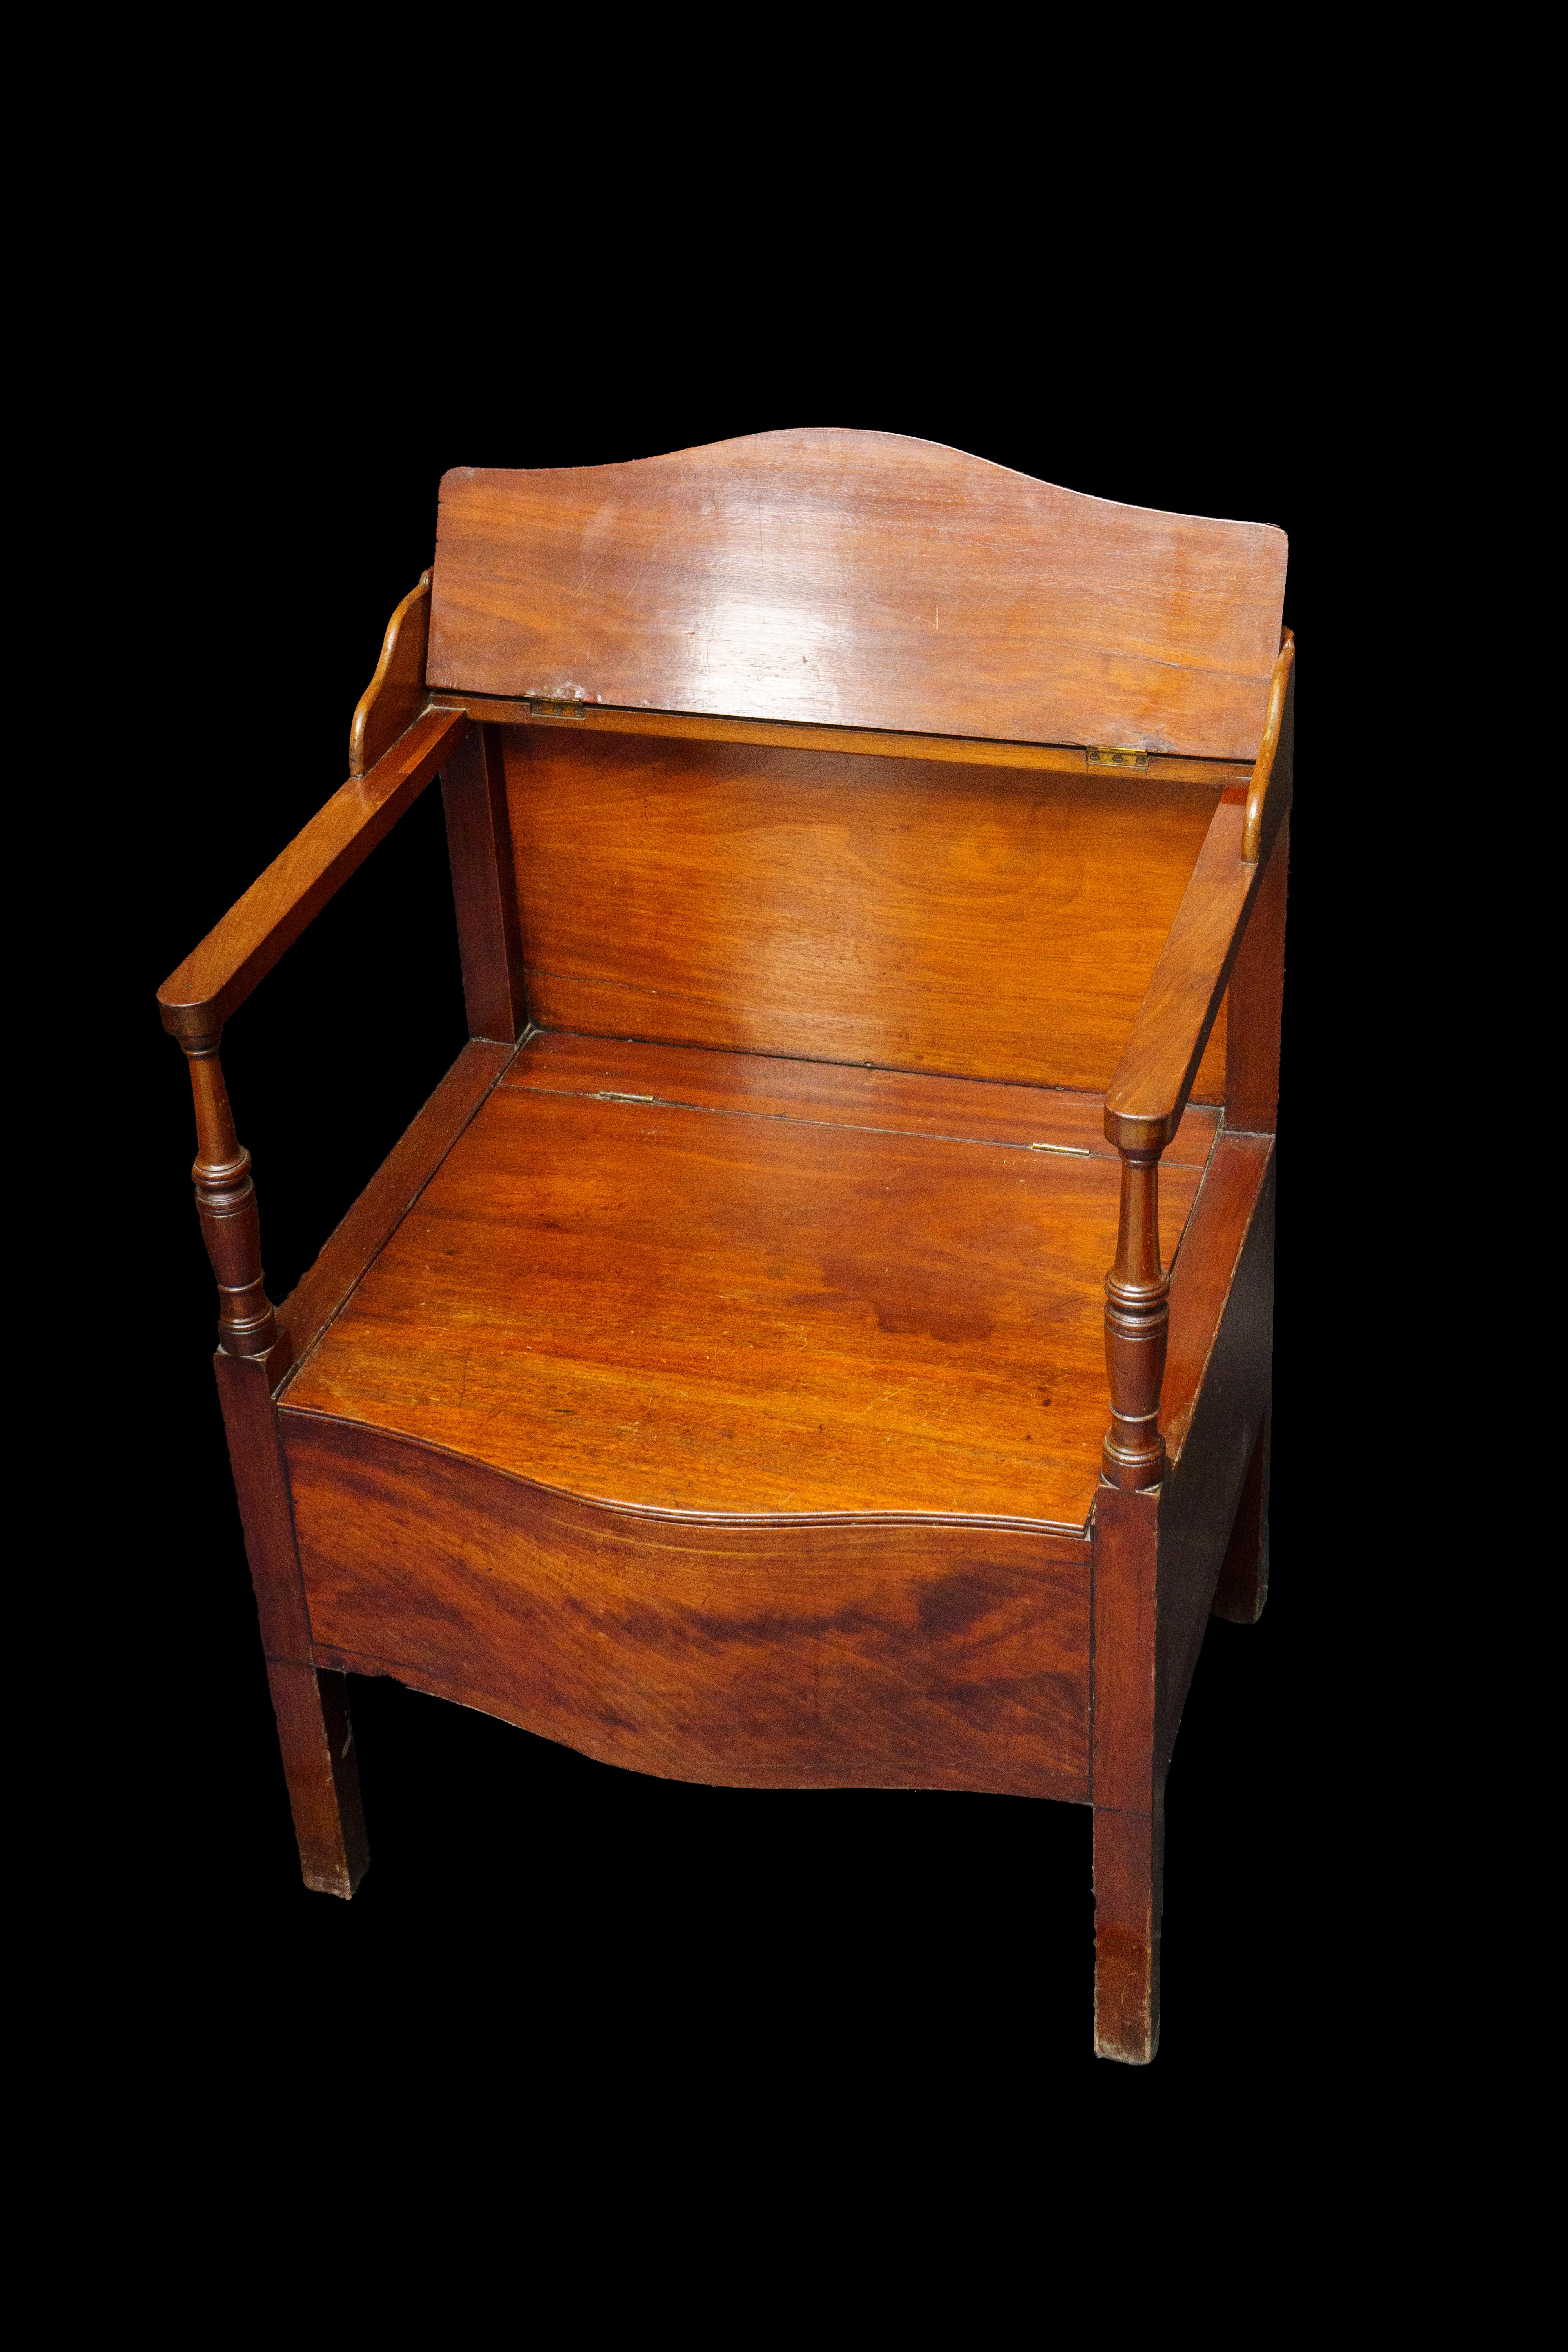 antique wooden commode chair